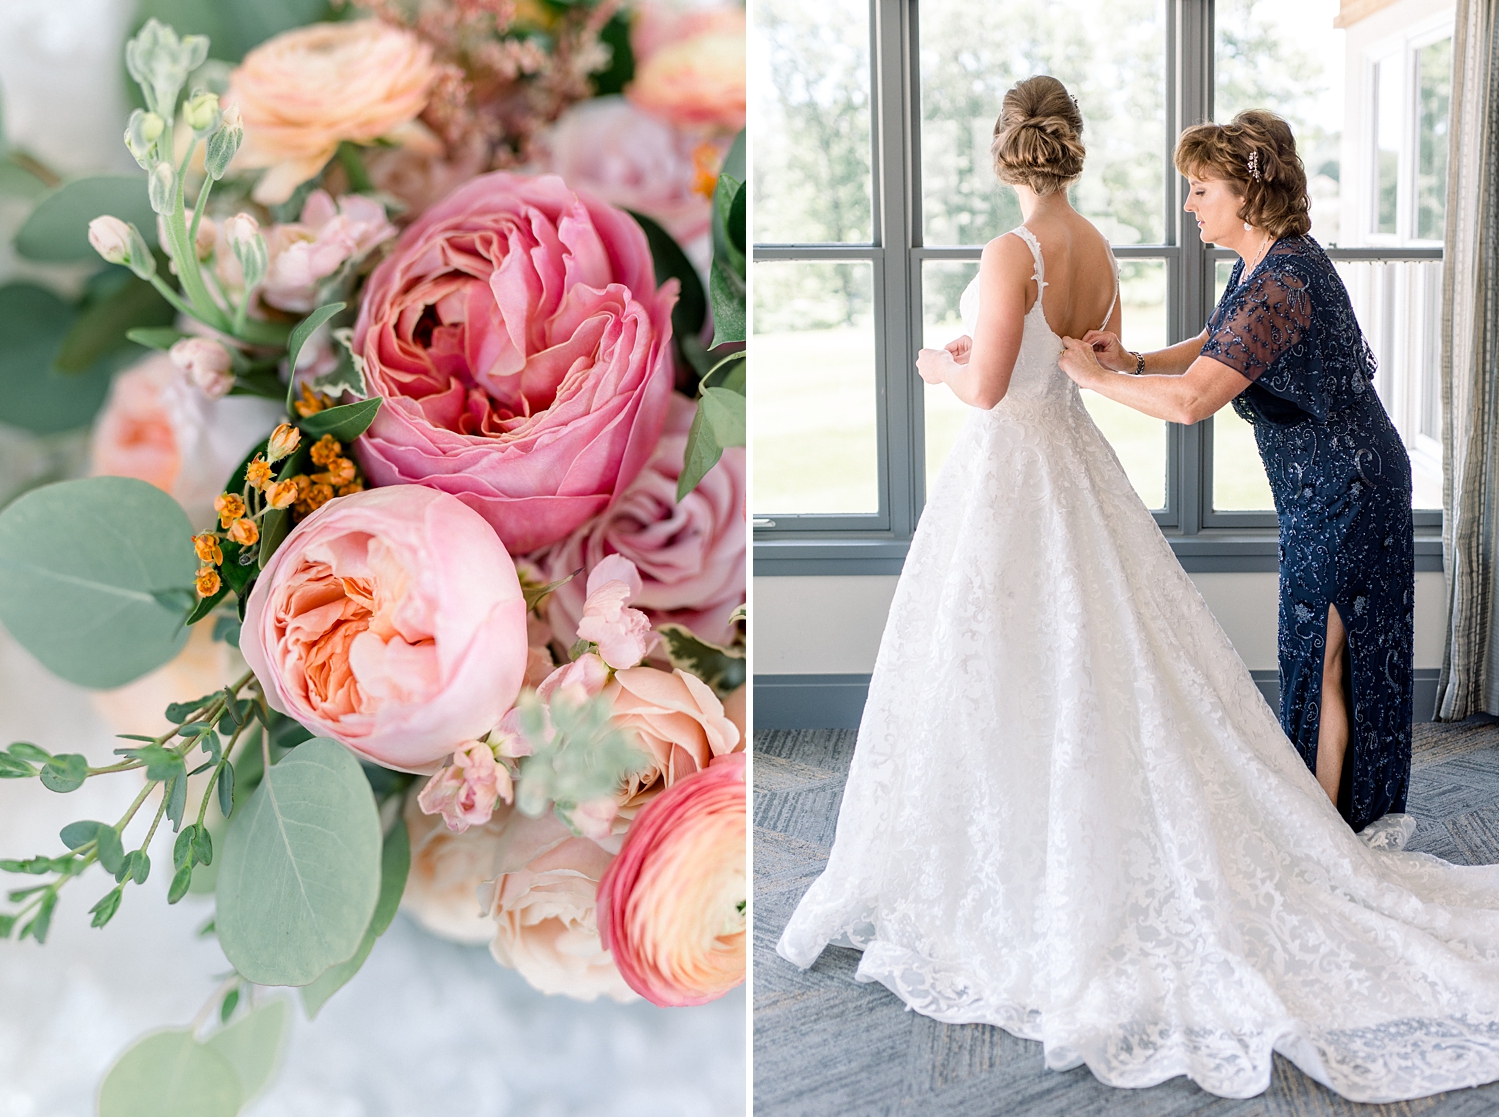 Romantic Garden Themed, Peach and Coral Summertime Wedding by Erika Christine Photography. Large pink peony bridal boquet.